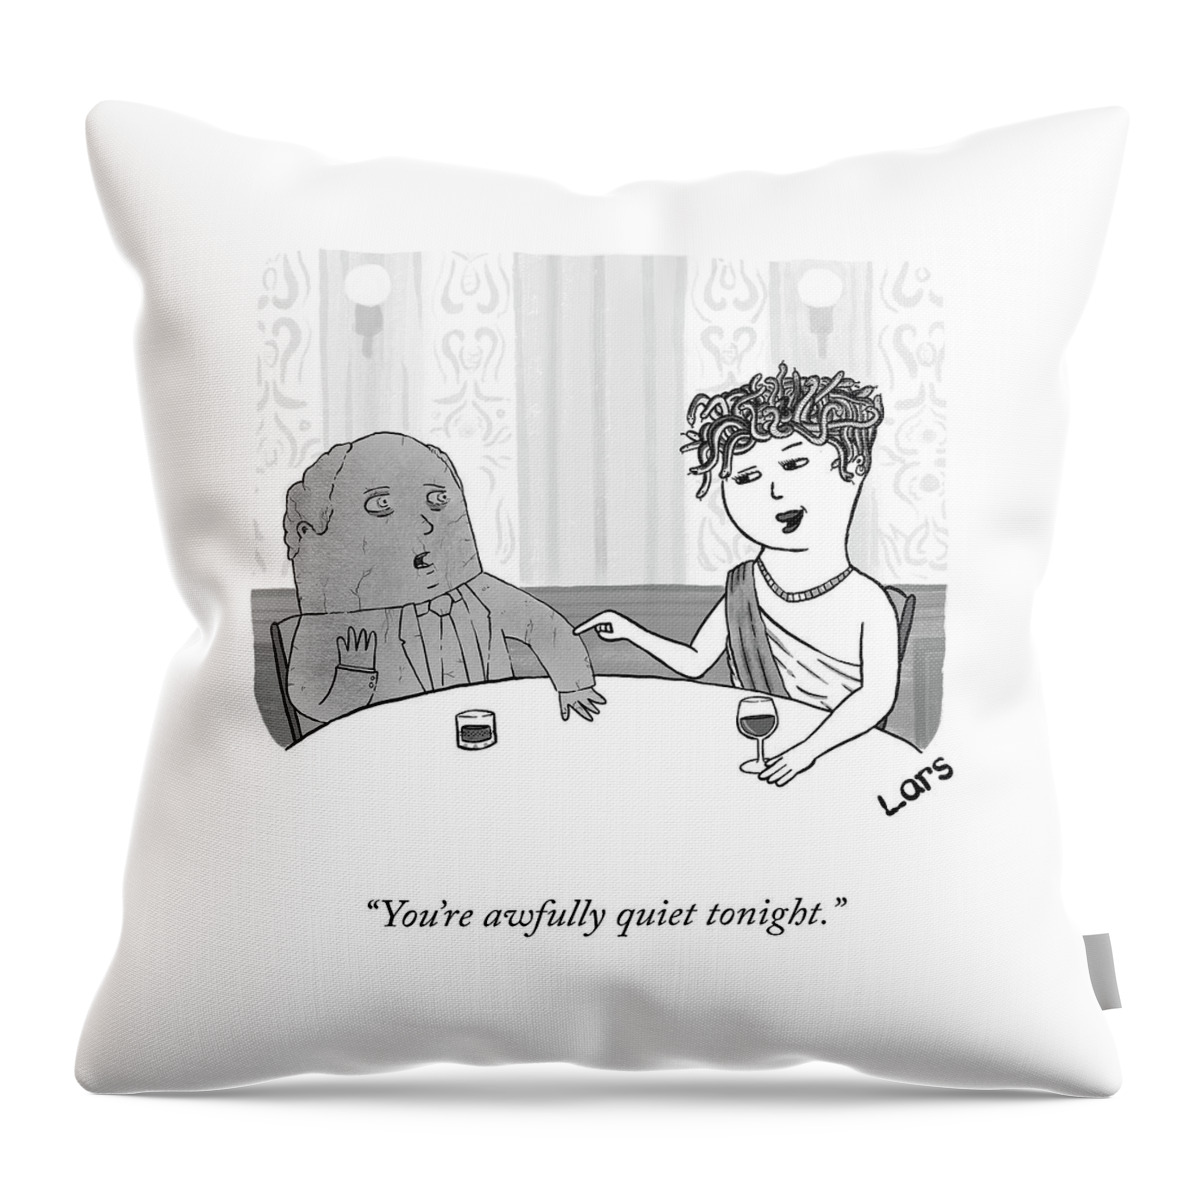 Awfully Quiet Throw Pillow